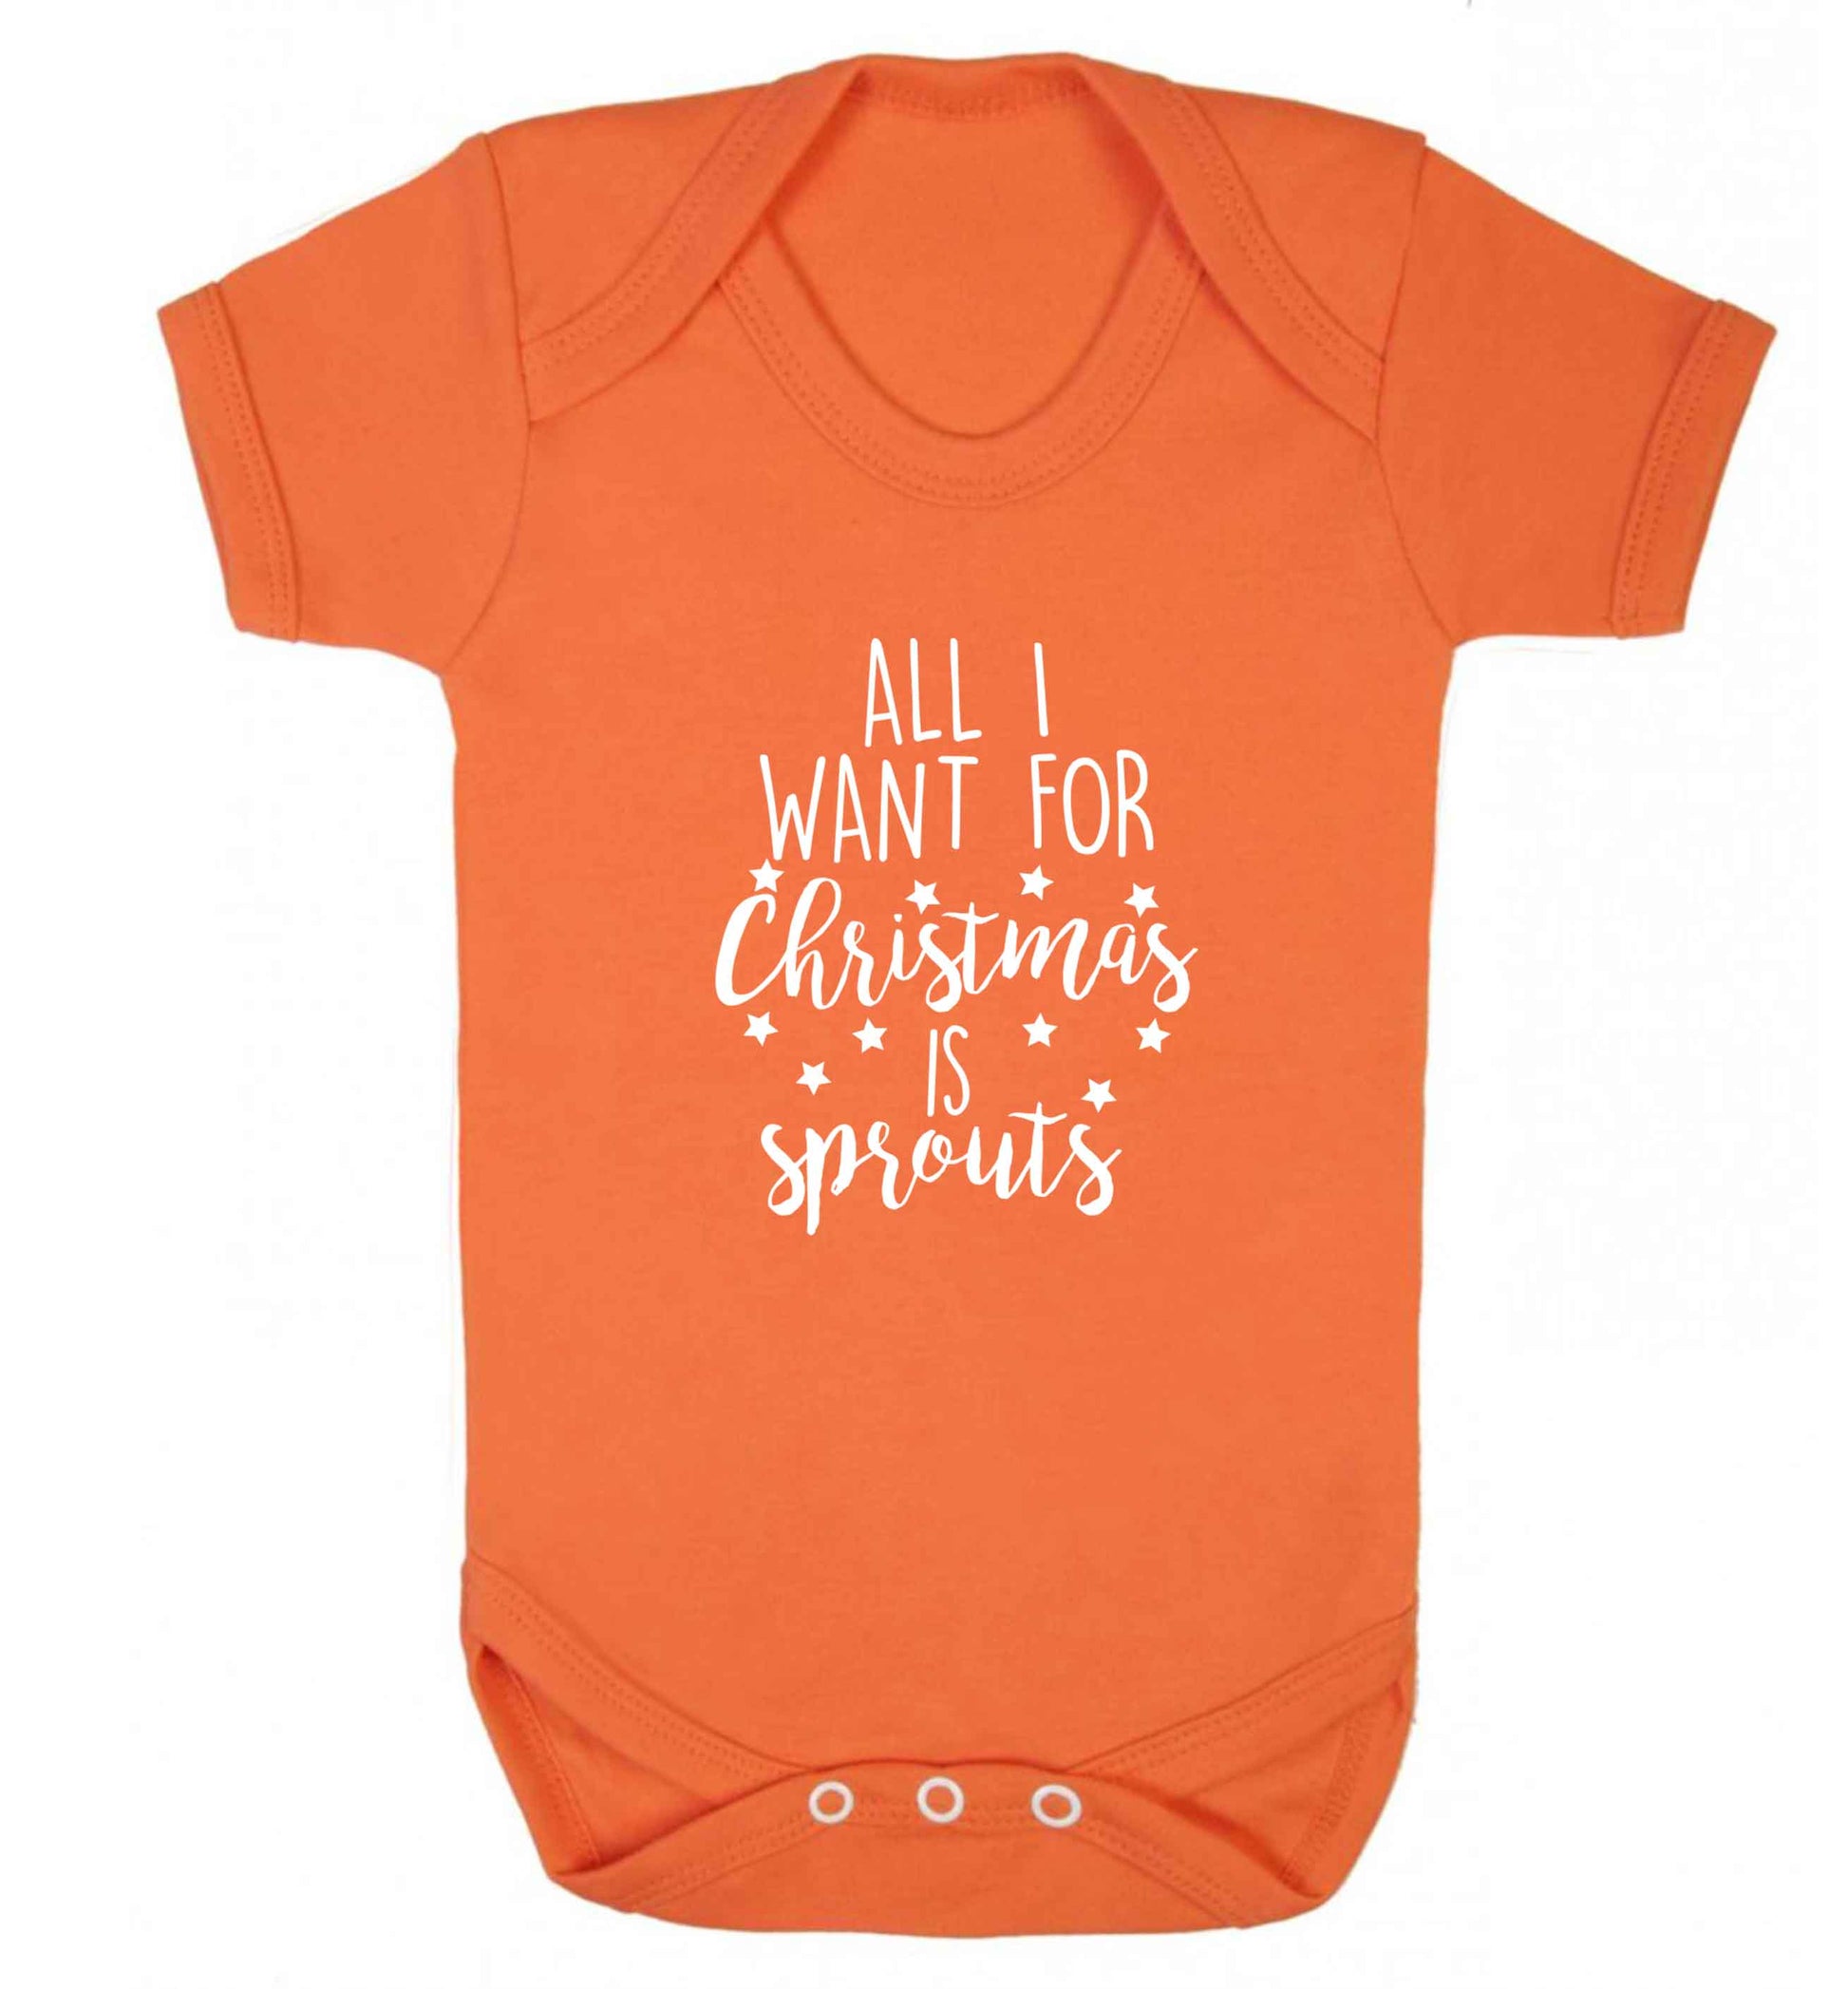 All I want for Christmas is sprouts baby vest orange 18-24 months